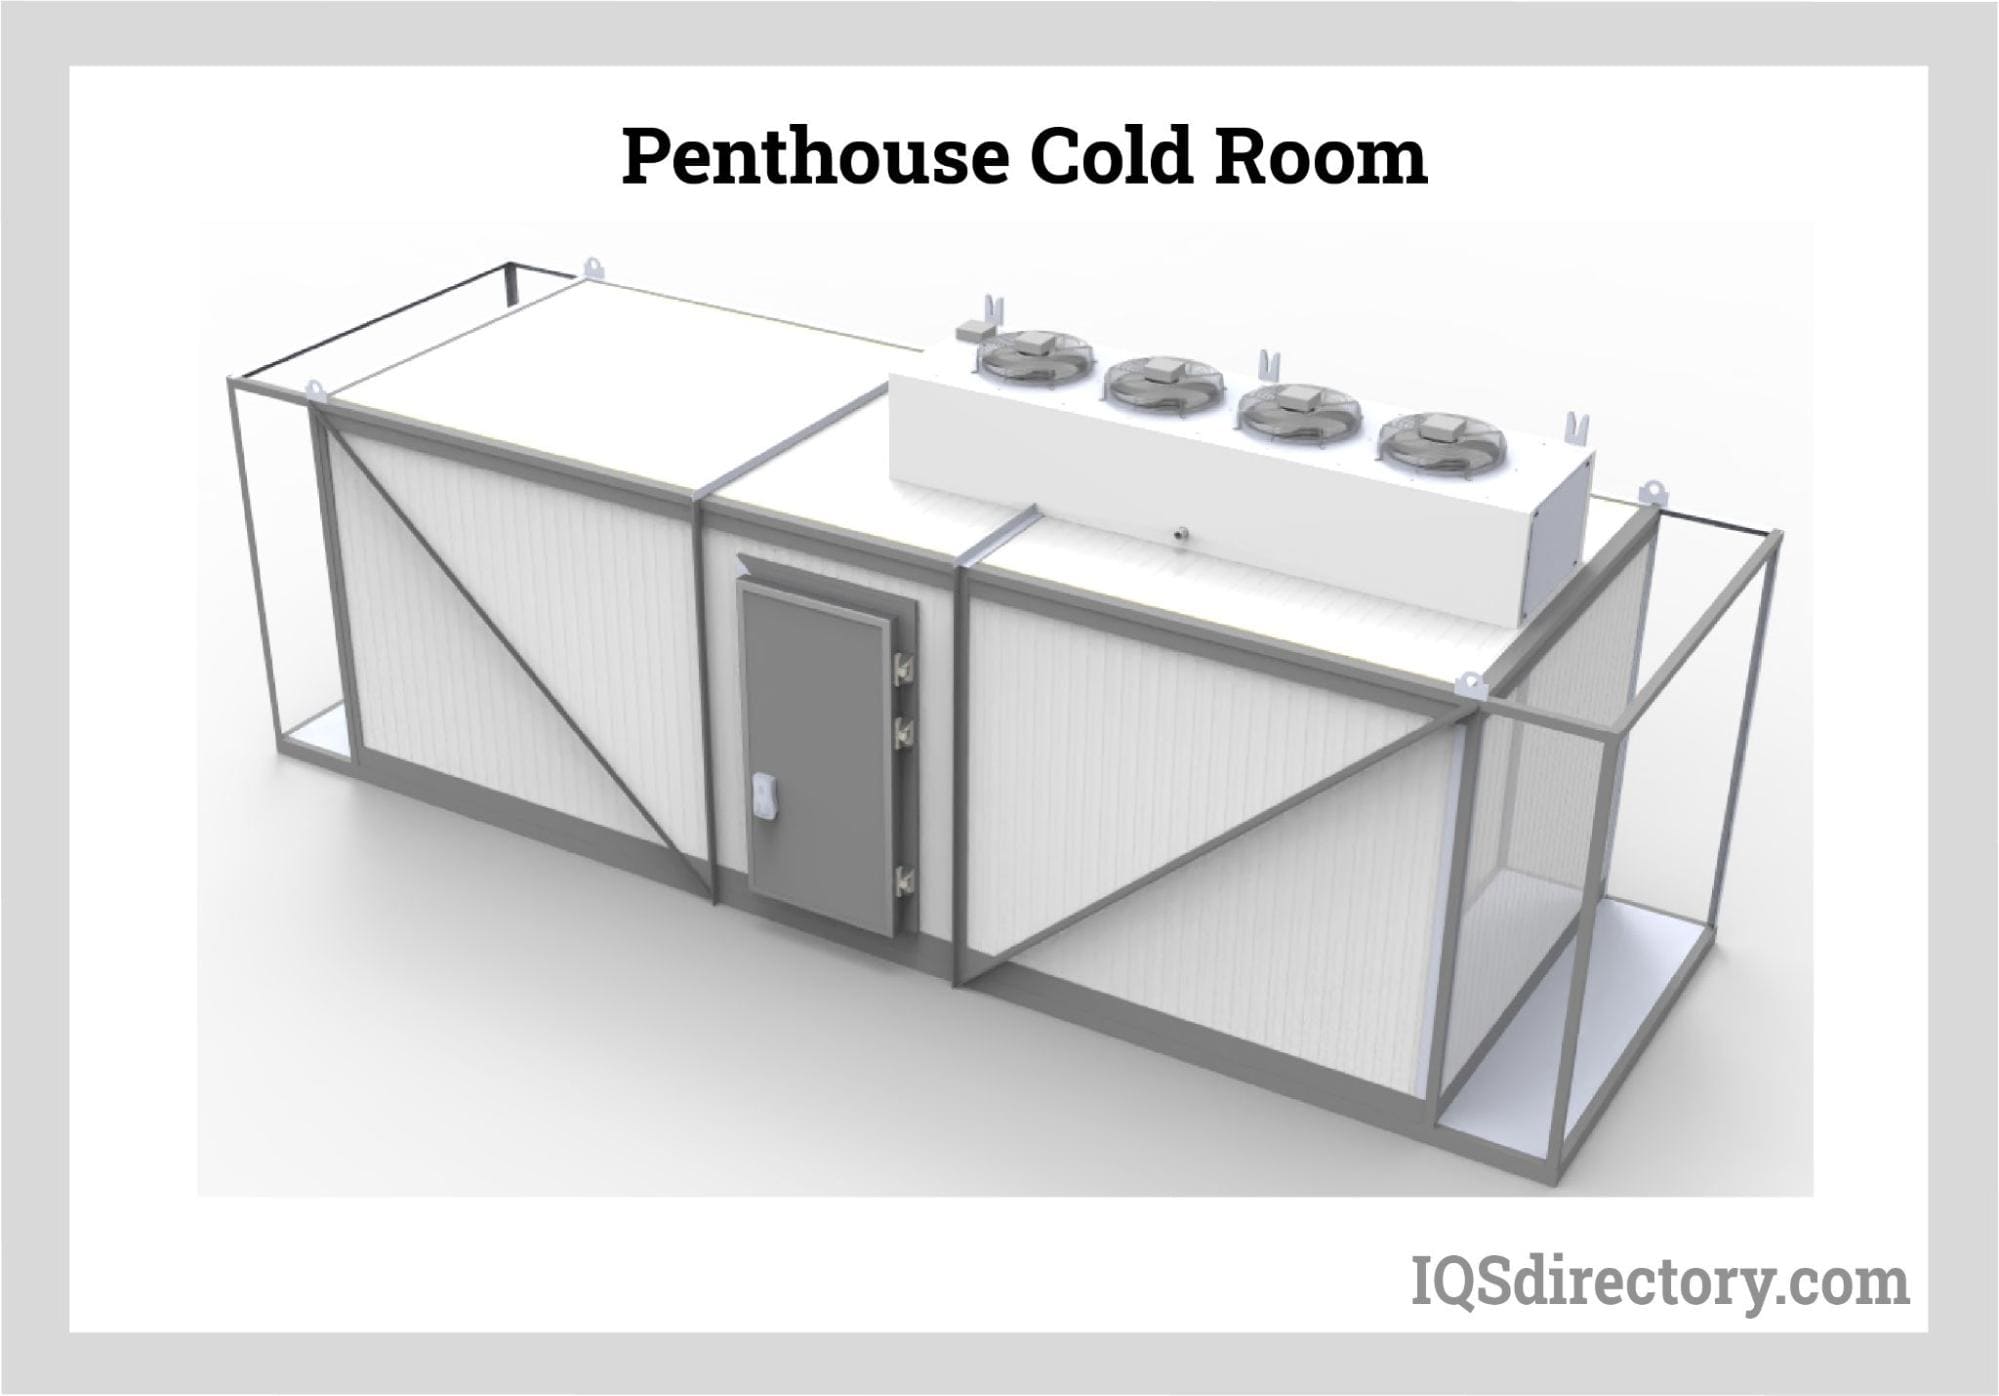 Penthouse Cold Room